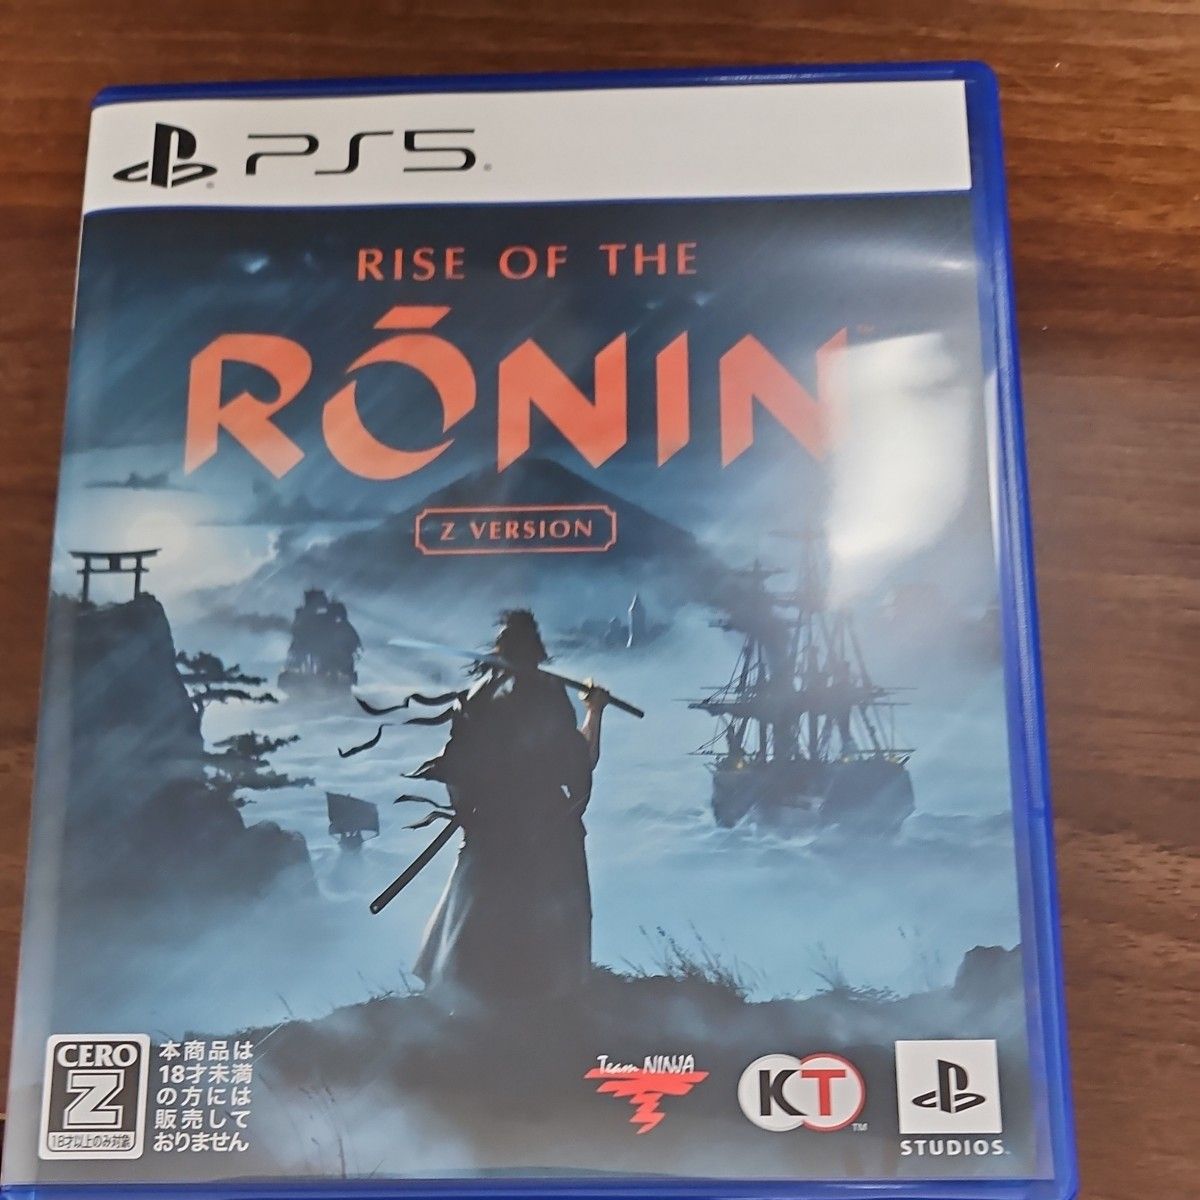 ［PS5］RISE OF THE RONIN Z VERSION  ライズオブローニン　